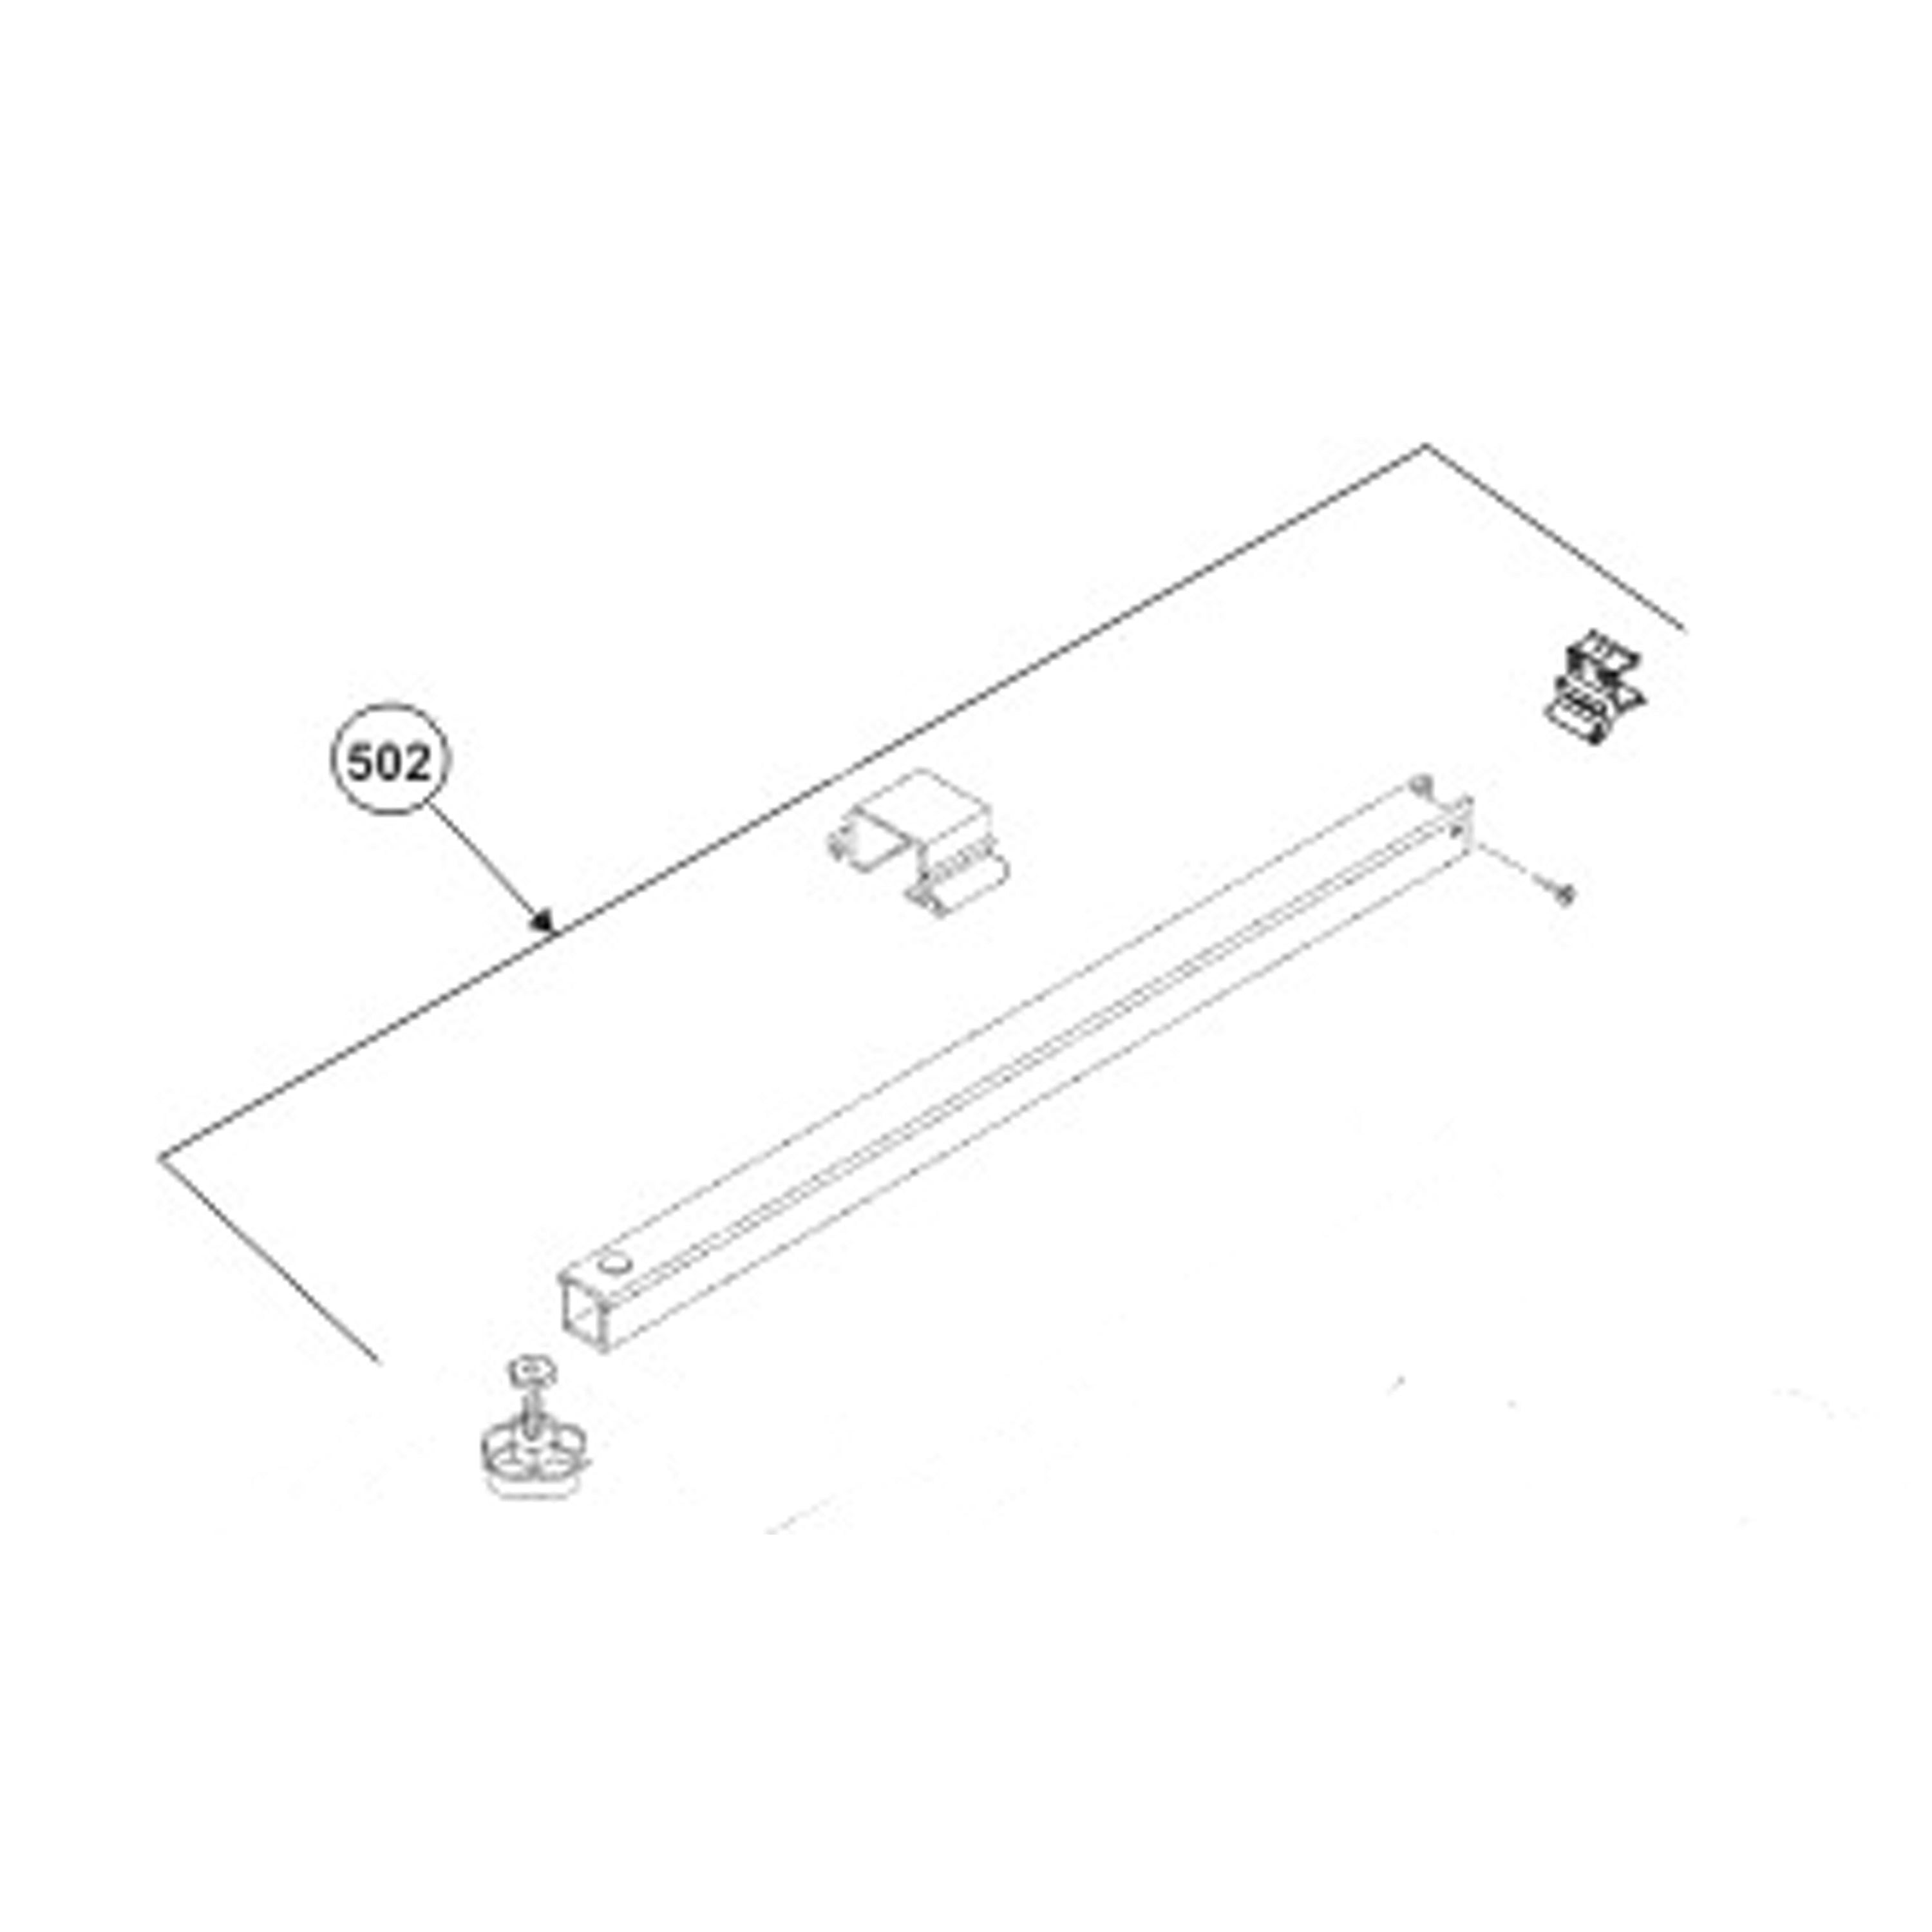 Dometic 3312047.000B Awning Main Rafter Assembly Kit 66 Polar White 